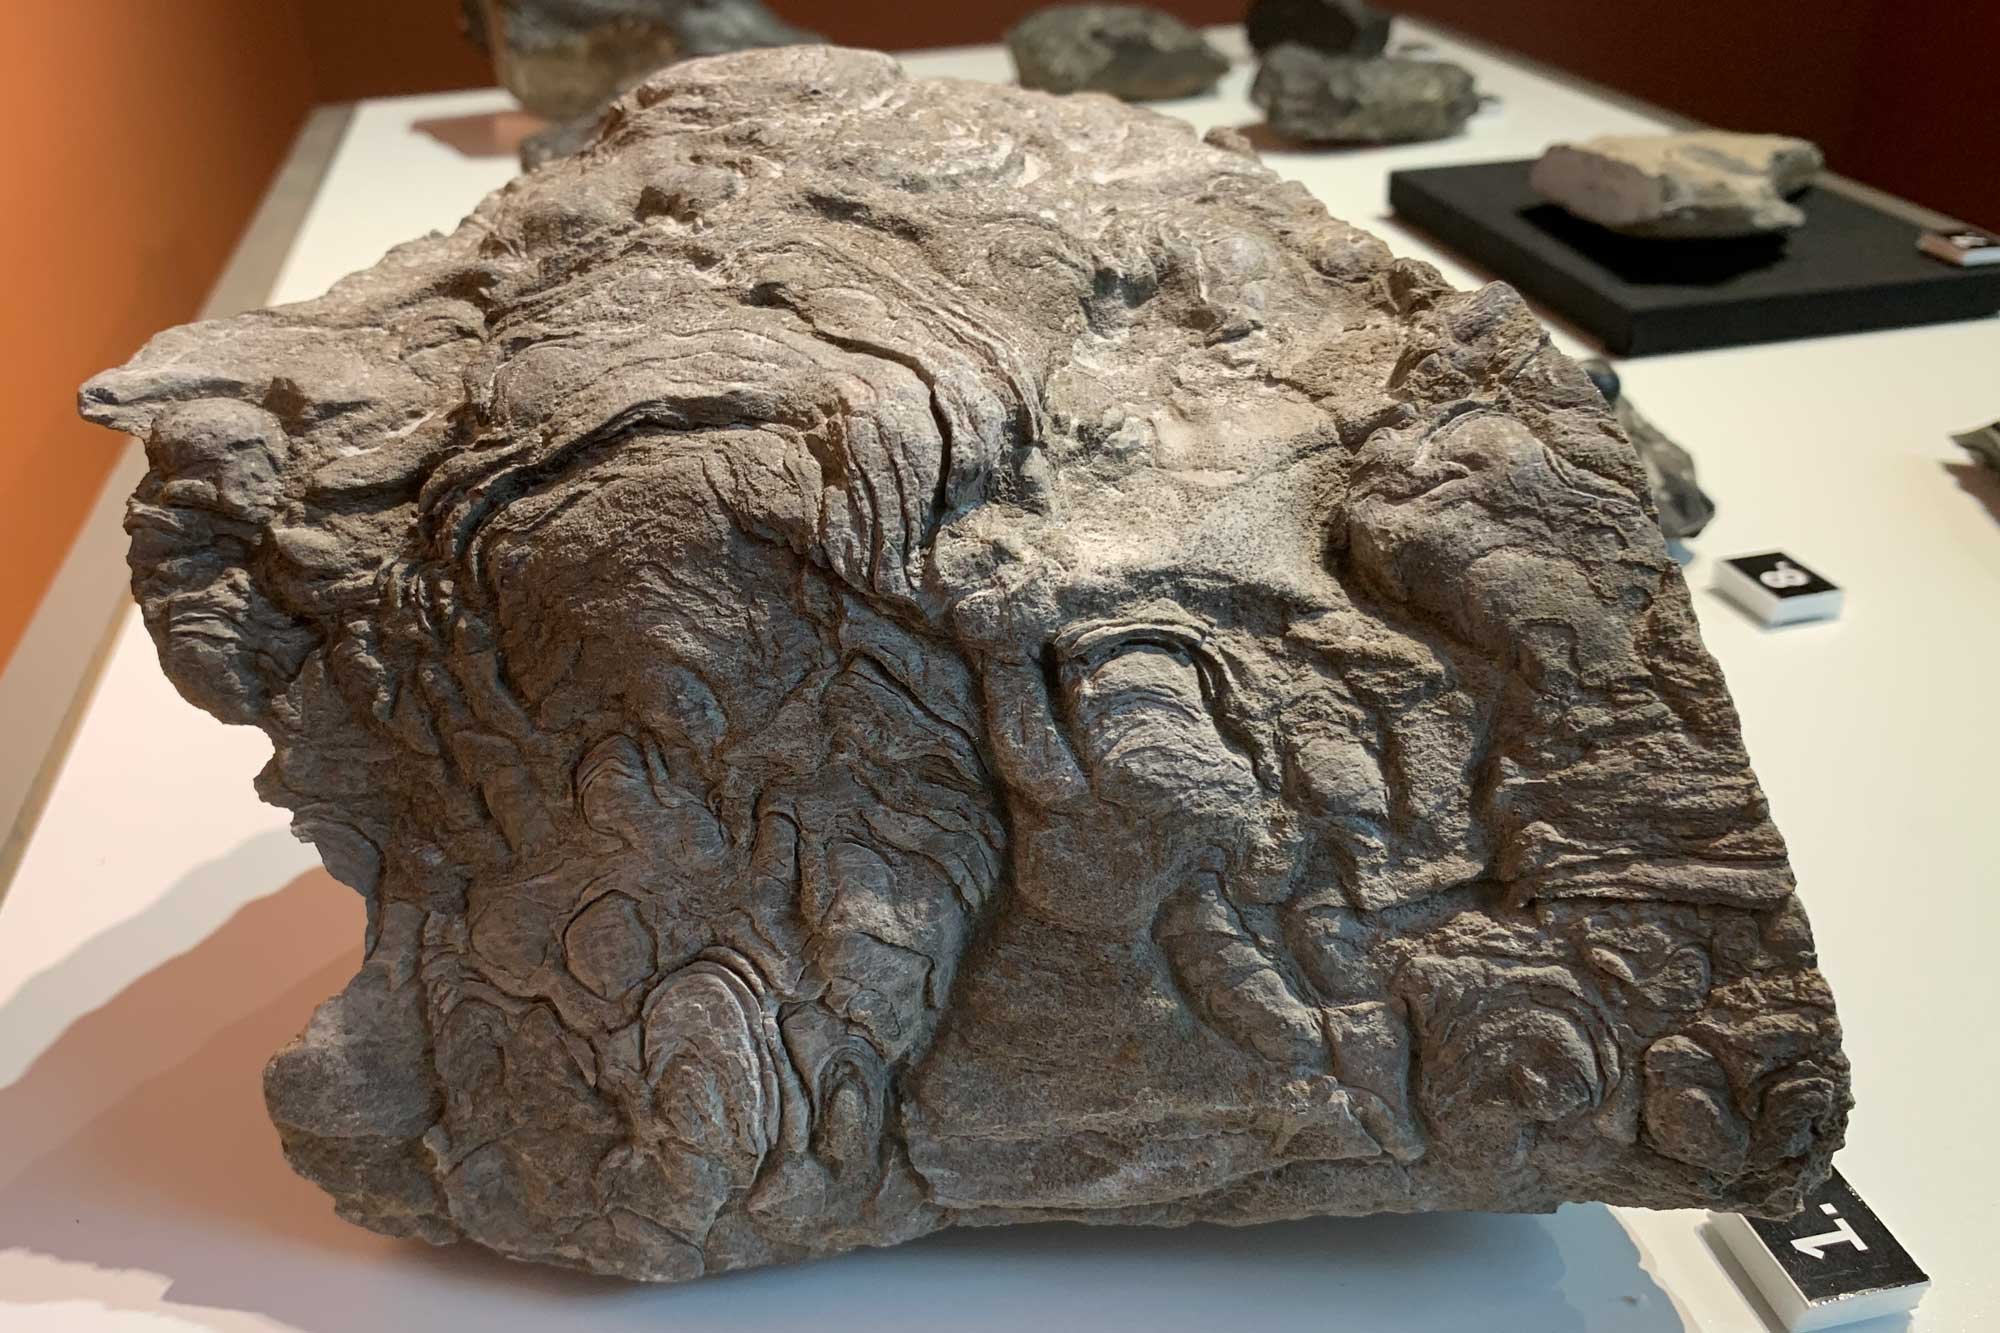 Photograph of a stromatolite fossil from Lester Park, New York.